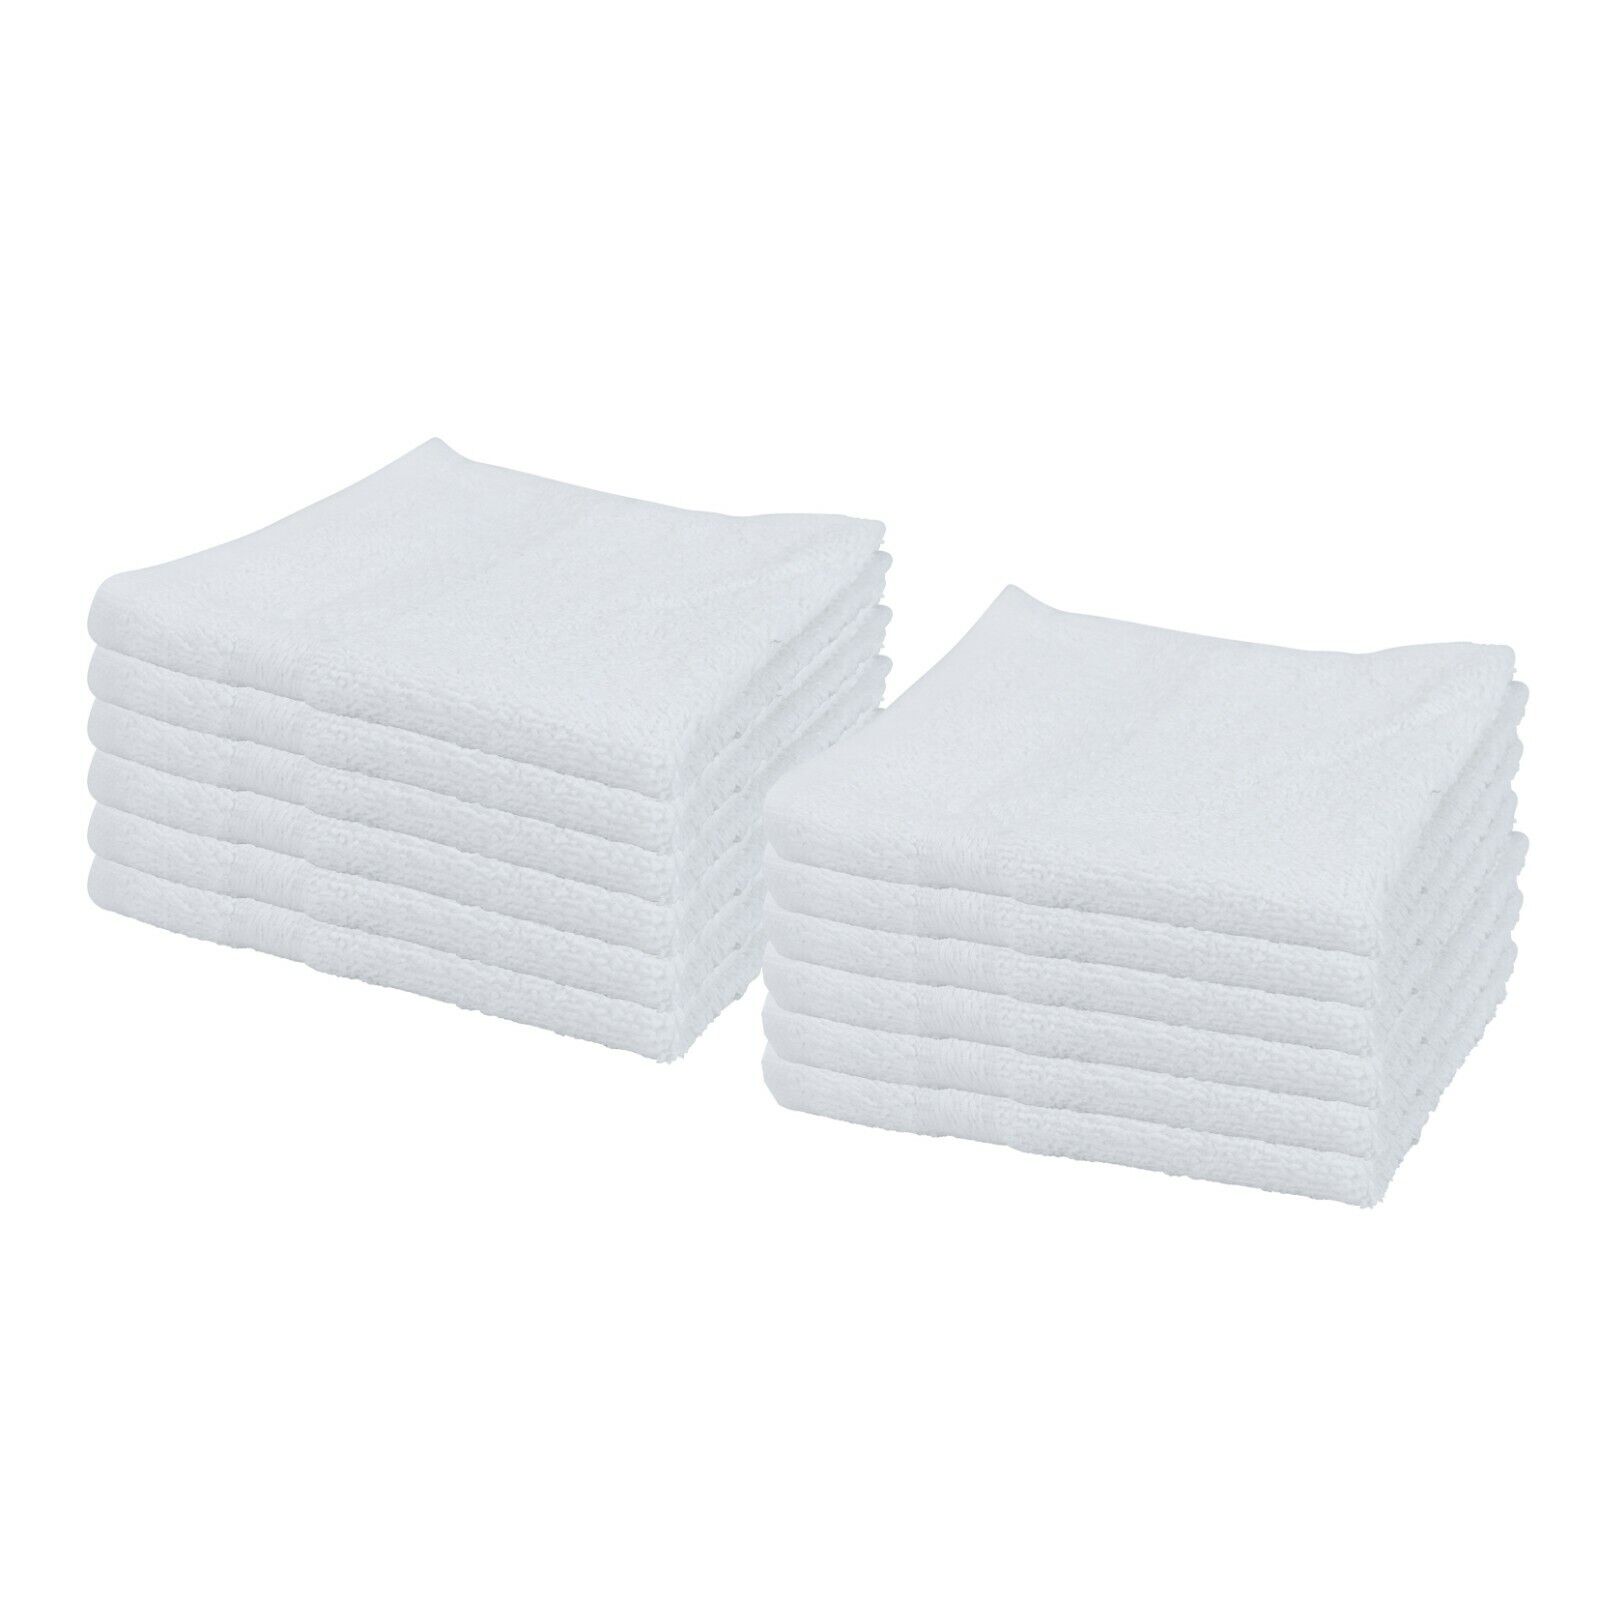 12 Pack of Admiral Washcloths - White - 13x13 - Bulk Bathroom Cotton Towels Arkwright Does Not Apply